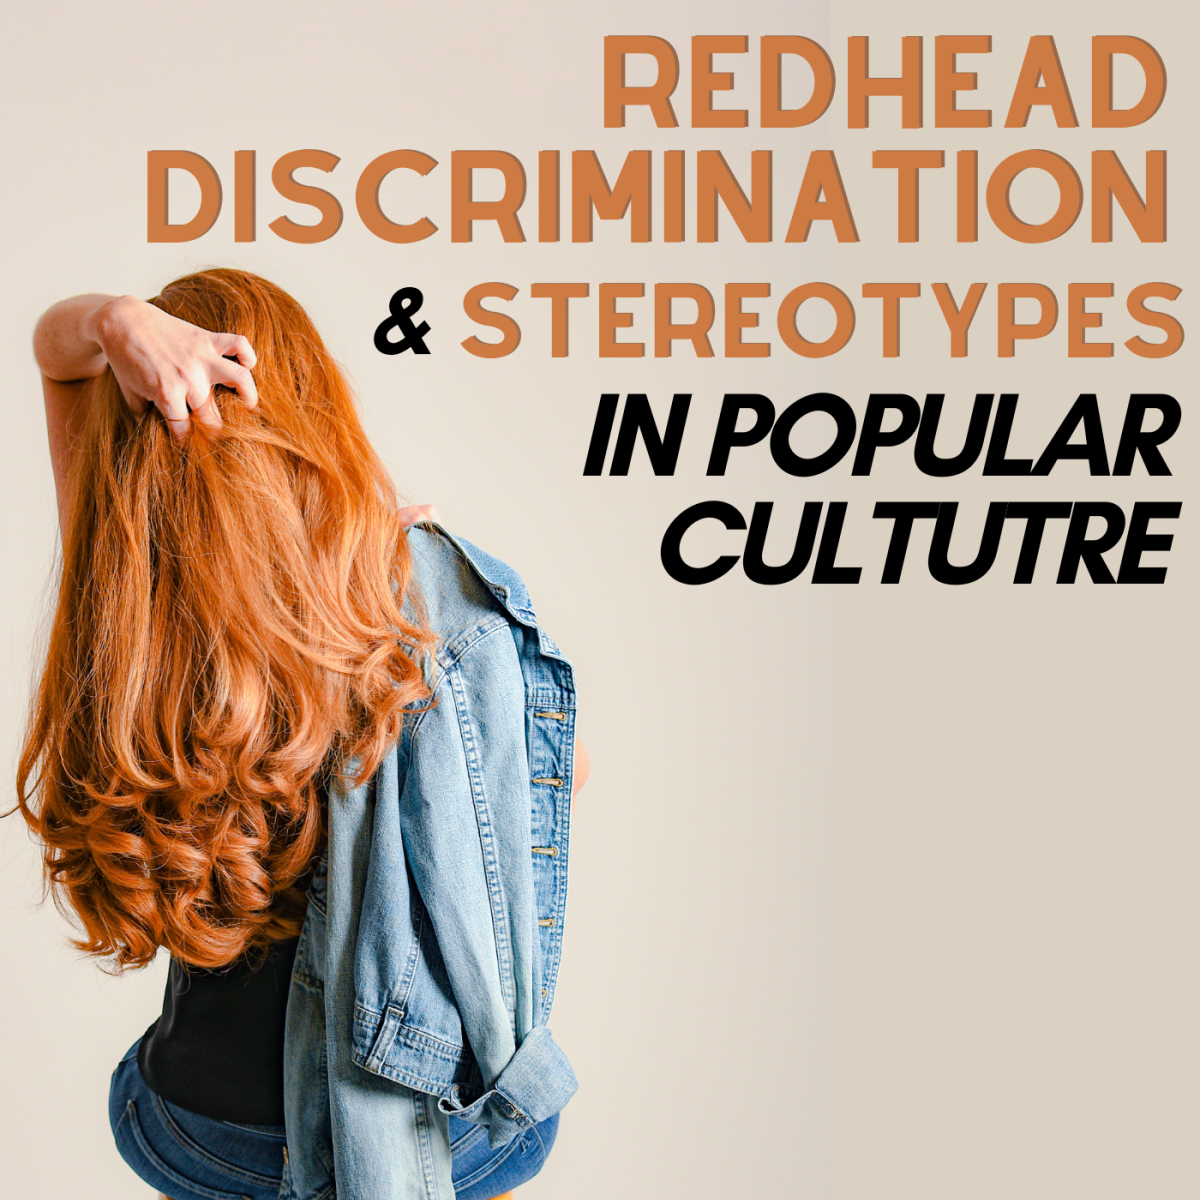 Popular culture's stereotypes and discrimination of redheads